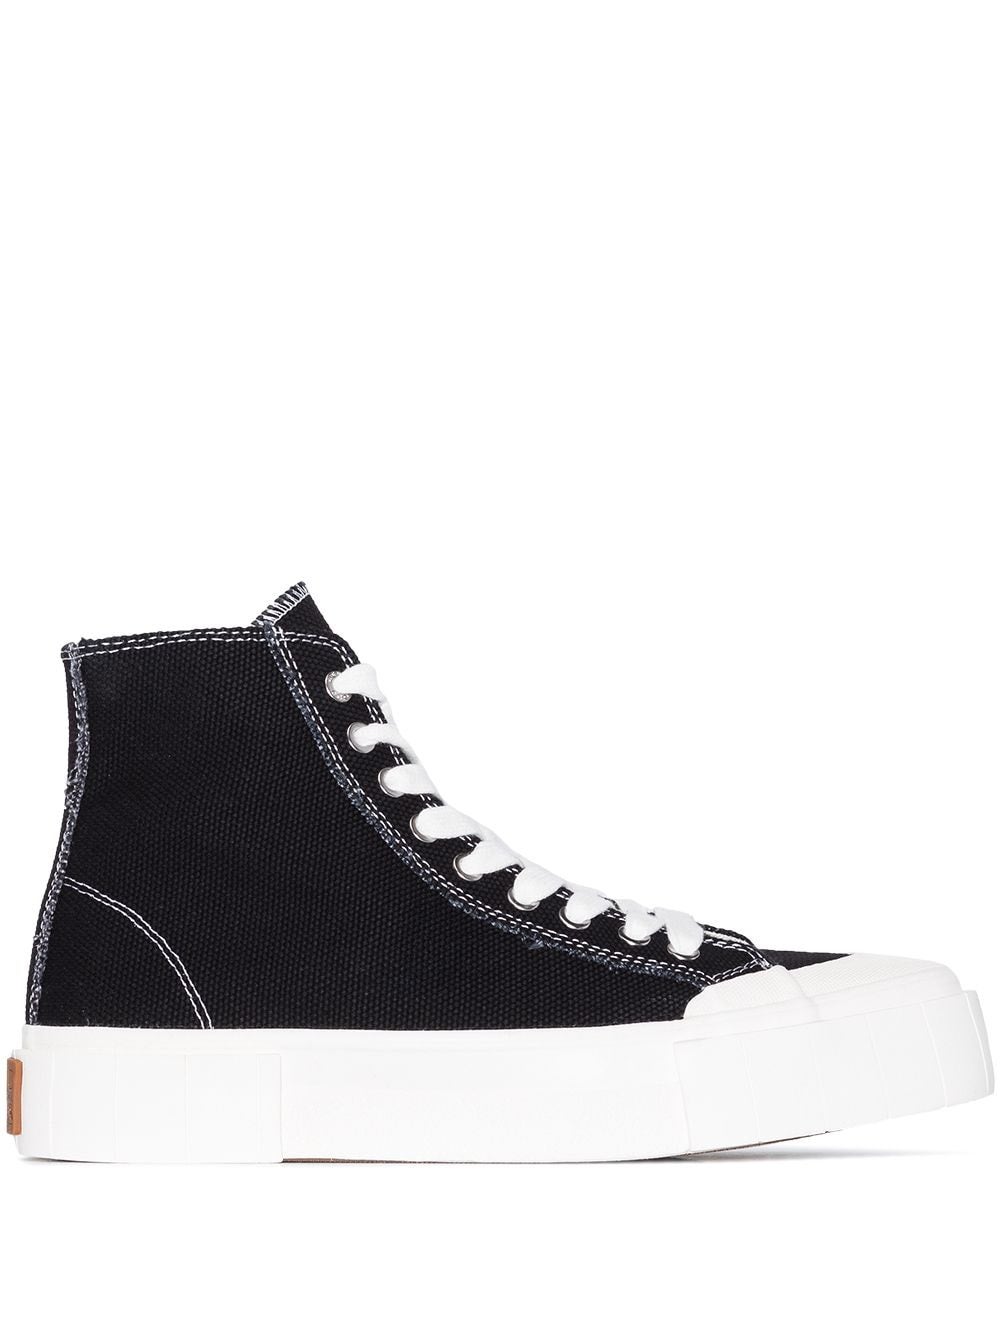 Good News + Palm high-top sneakers